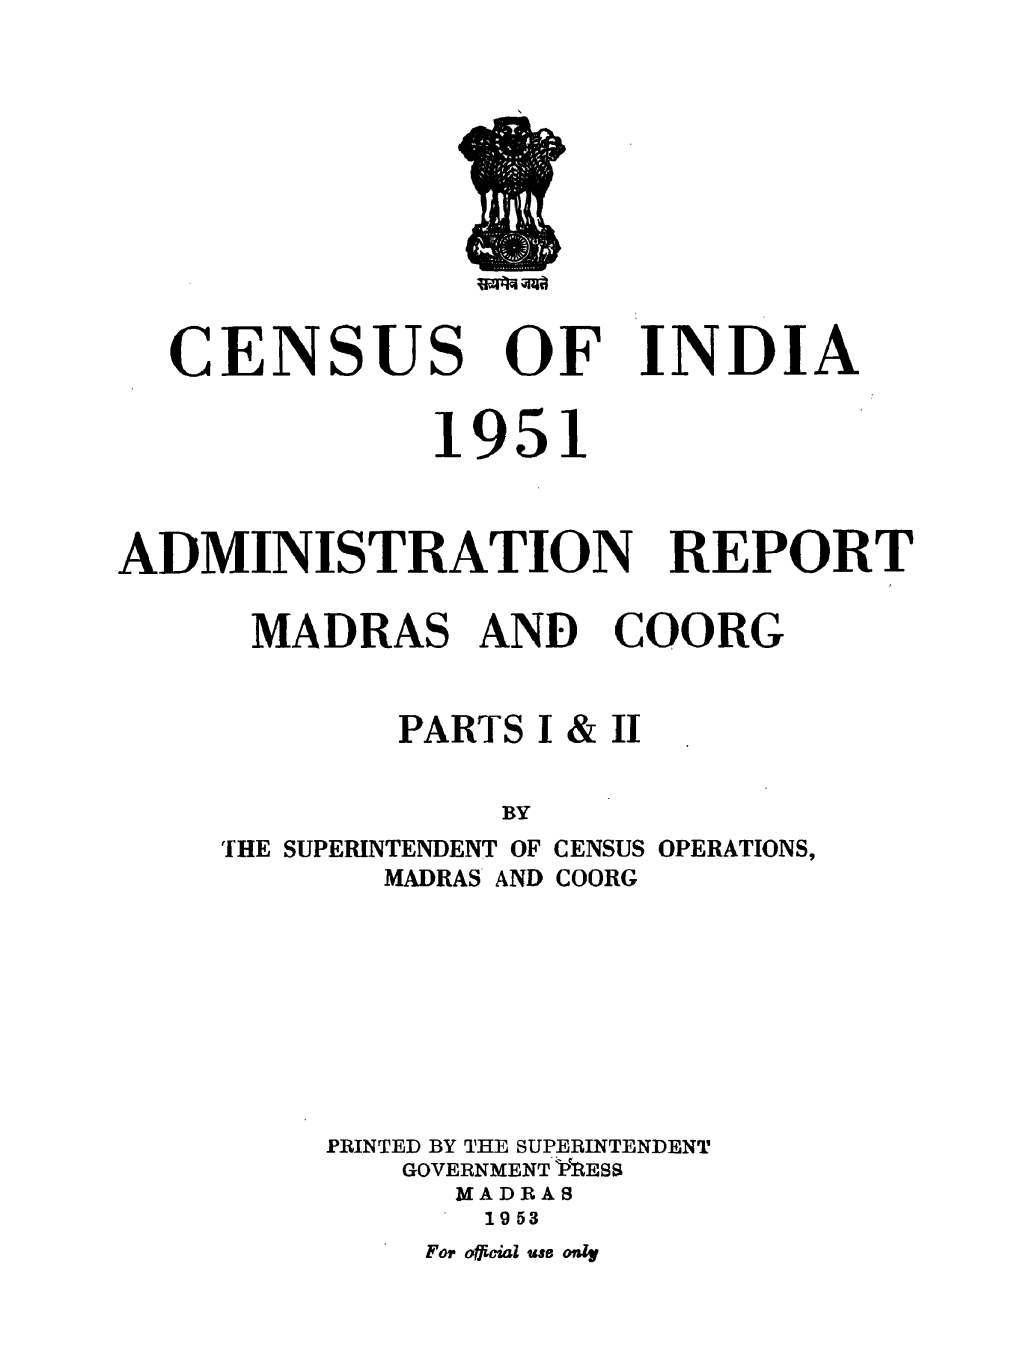 Administration Report Madras and Coorg, Parts I & II